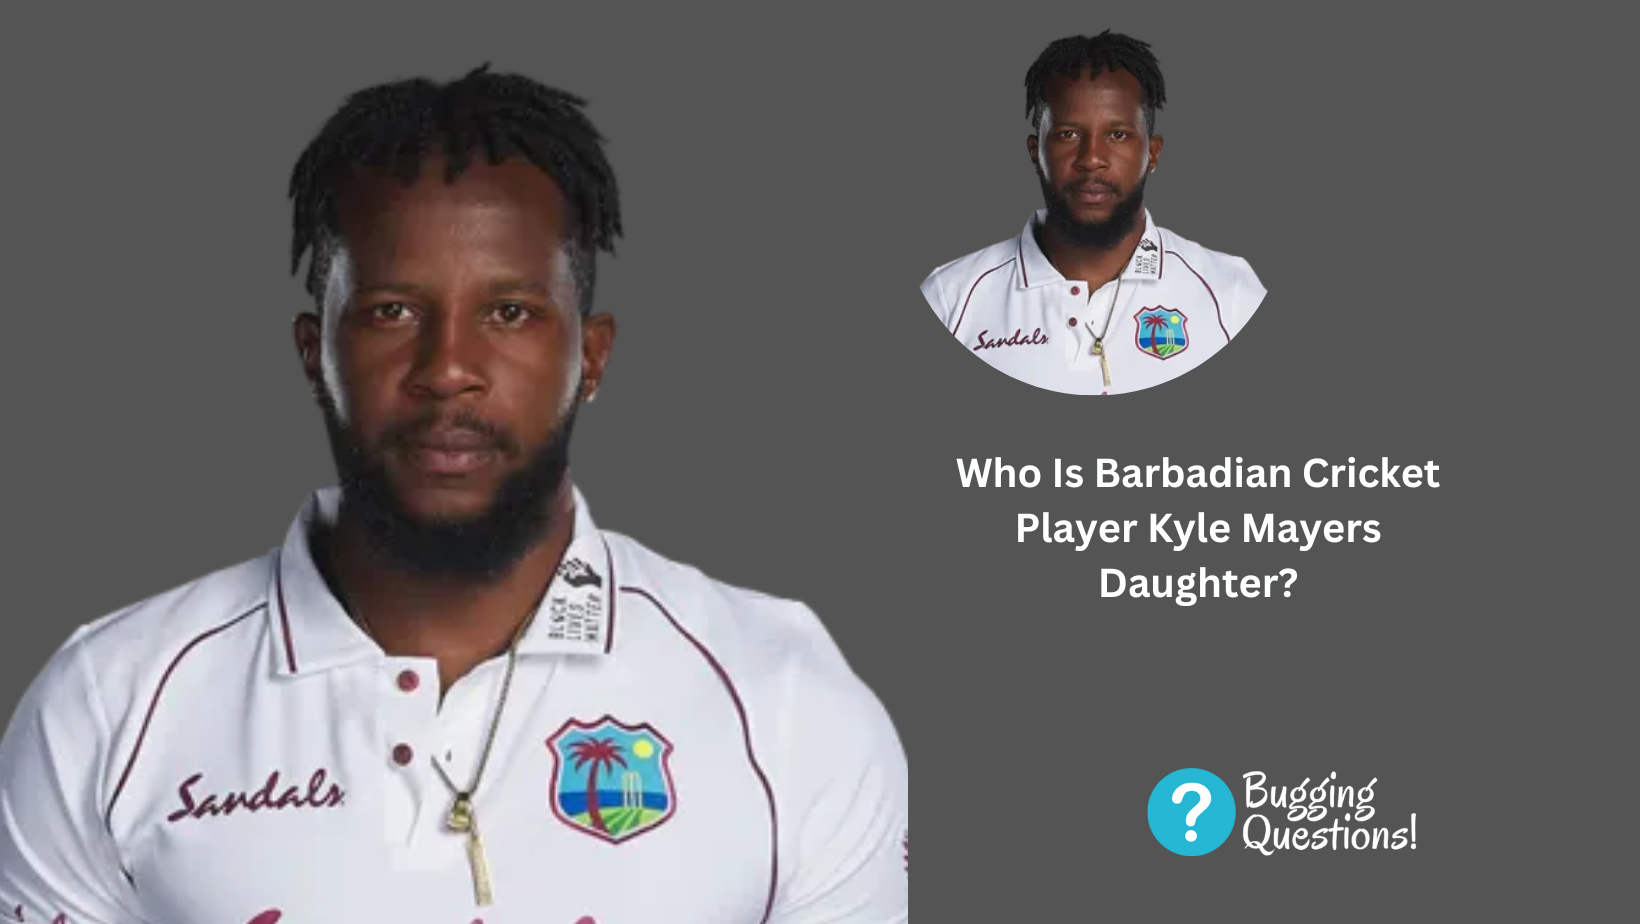 Who Is Barbadian Cricket Player Kyle Mayers Daughter?